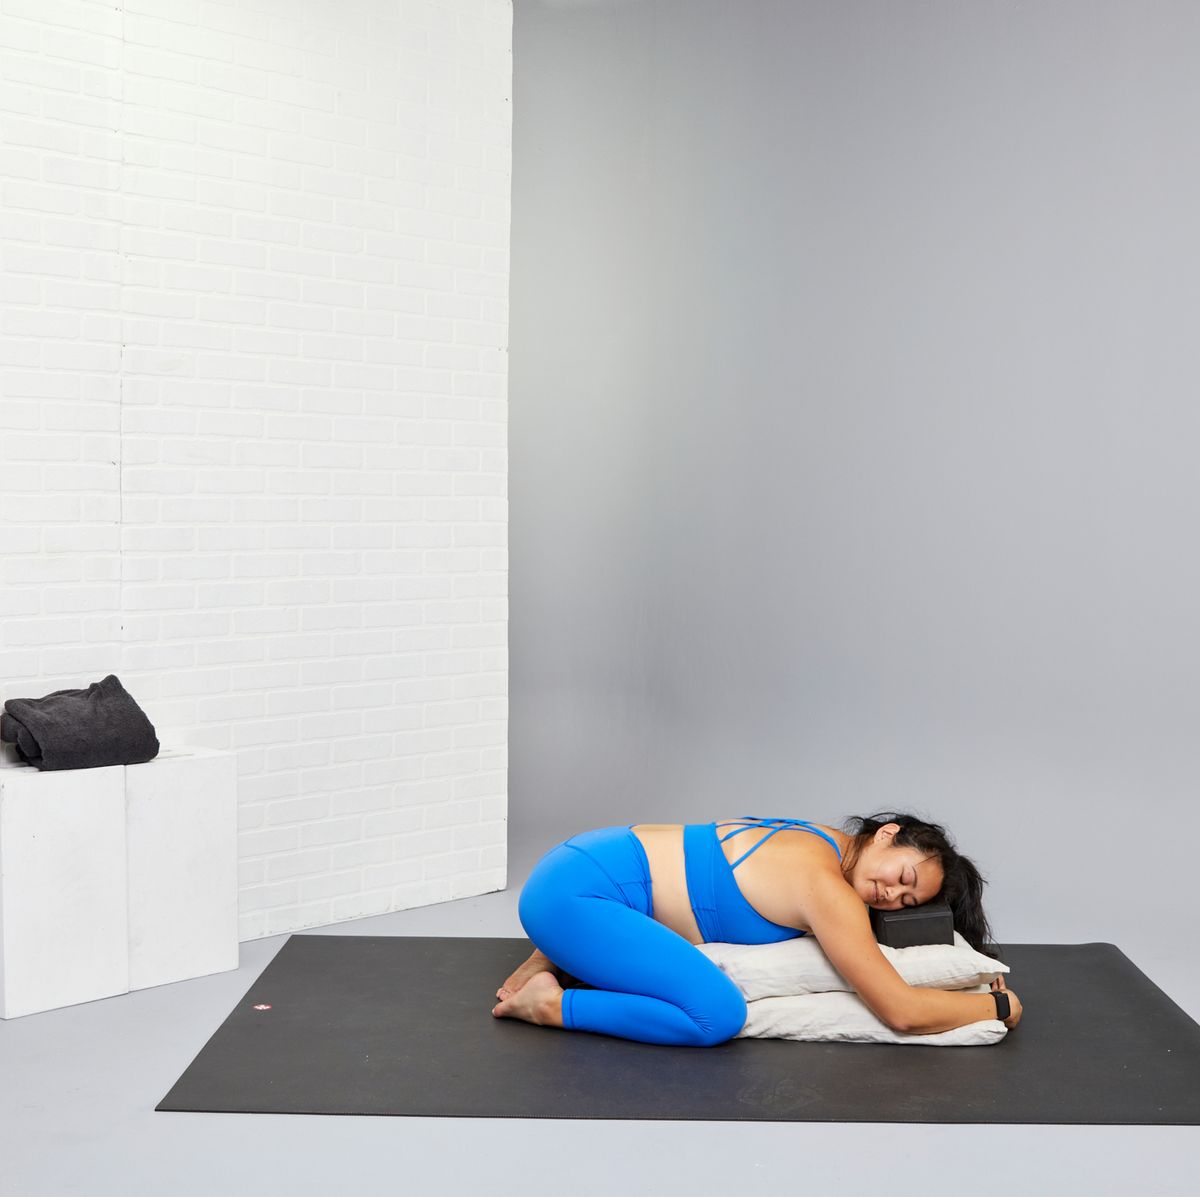 A gentle Yin Yoga sequence for the days you're feeling blocked